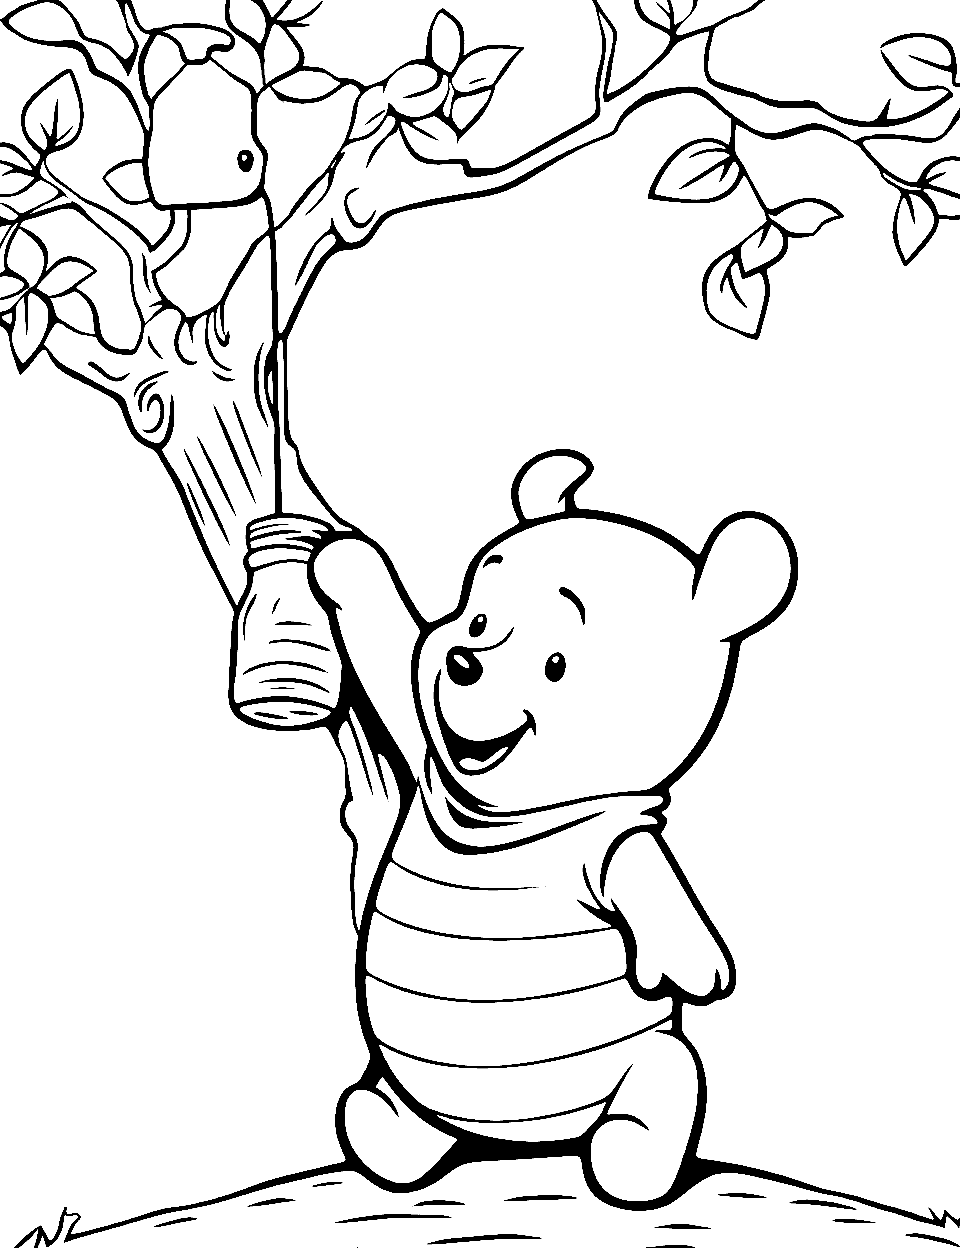 Winnie the Pooh Coloring Pages – Printable Coloring Pages